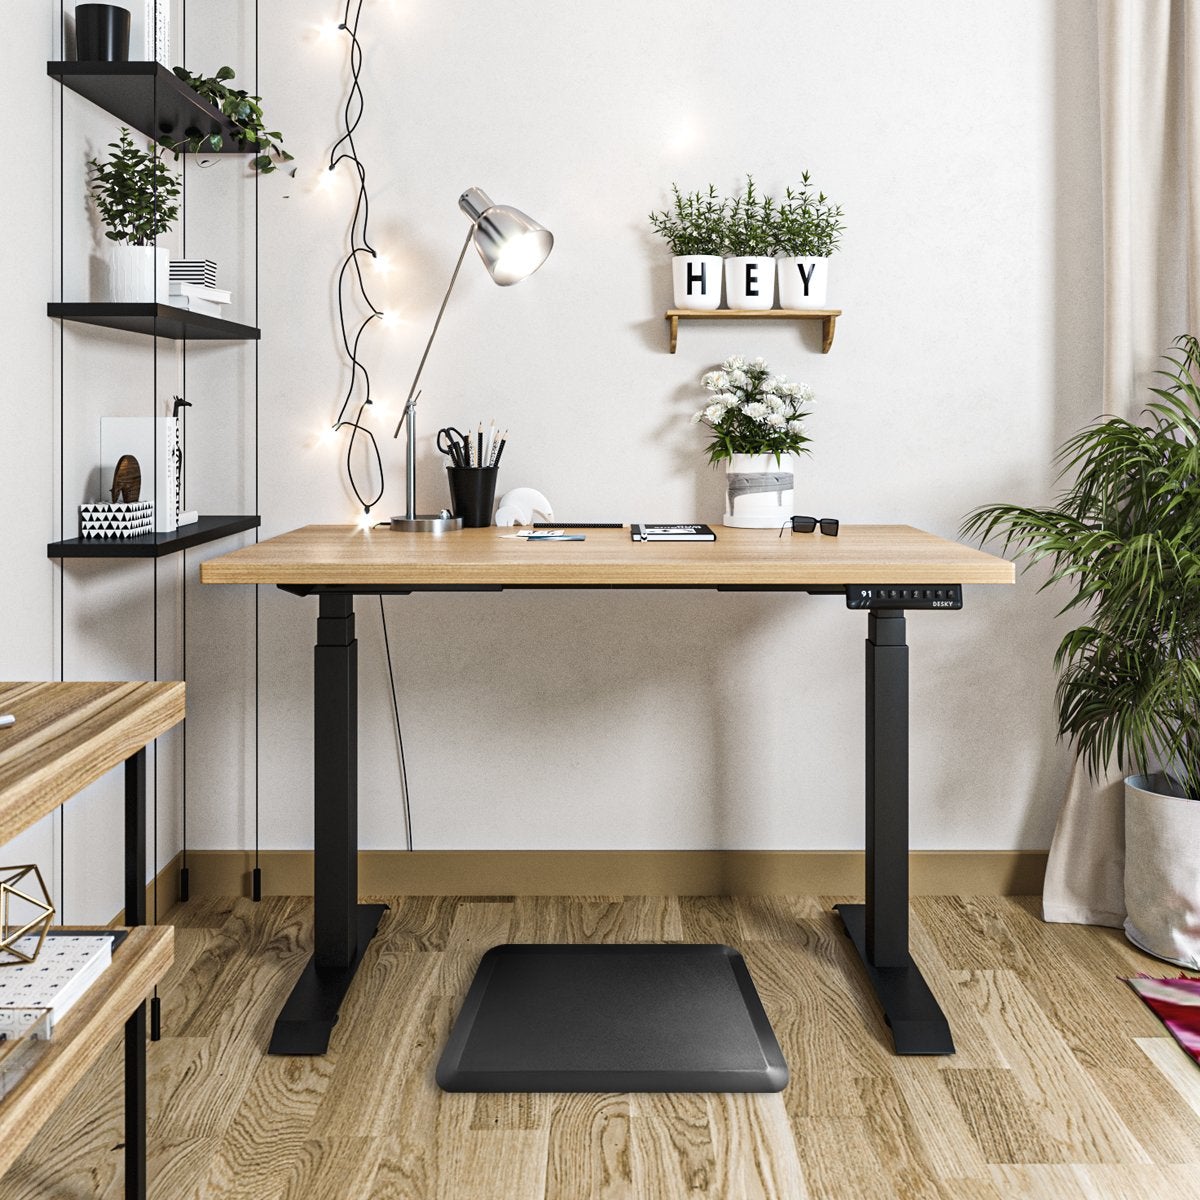 Mat - Anti-Fatigue - For Standing Desks - Sit-Stand Workstations, Display  Mounting and Mobility